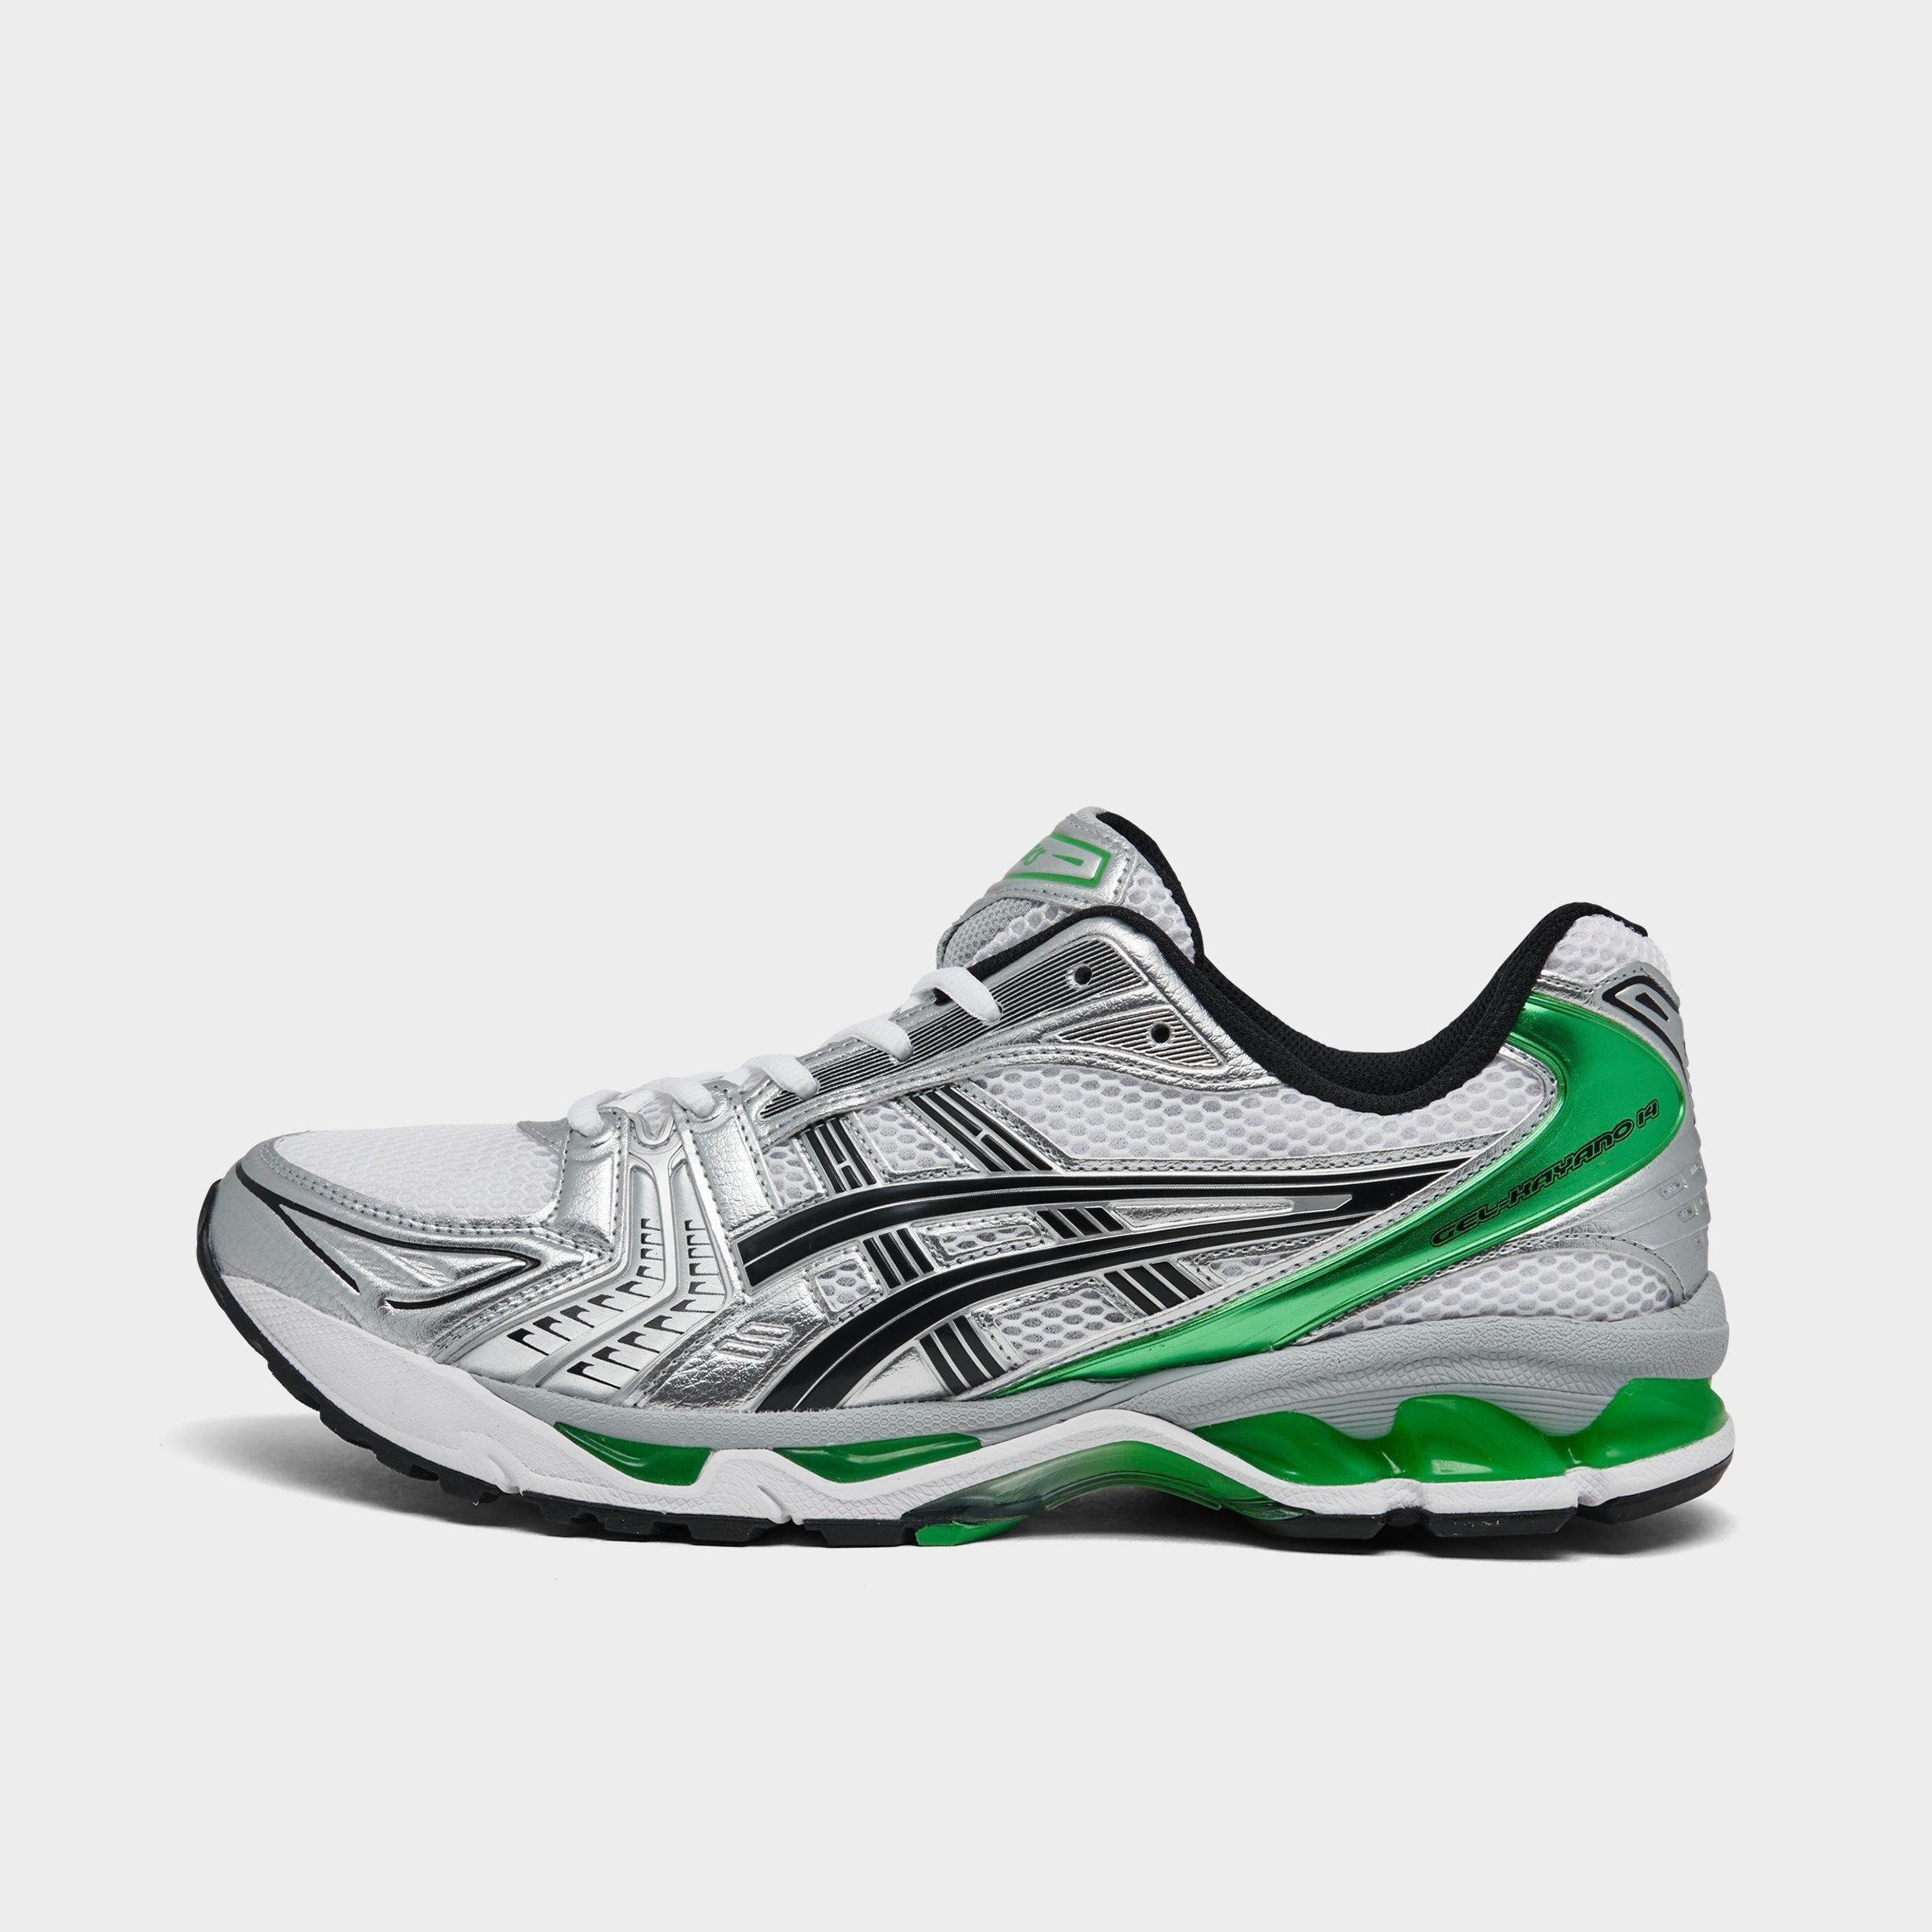 ASICS Shoes & Casual Sneakers | JD Sports